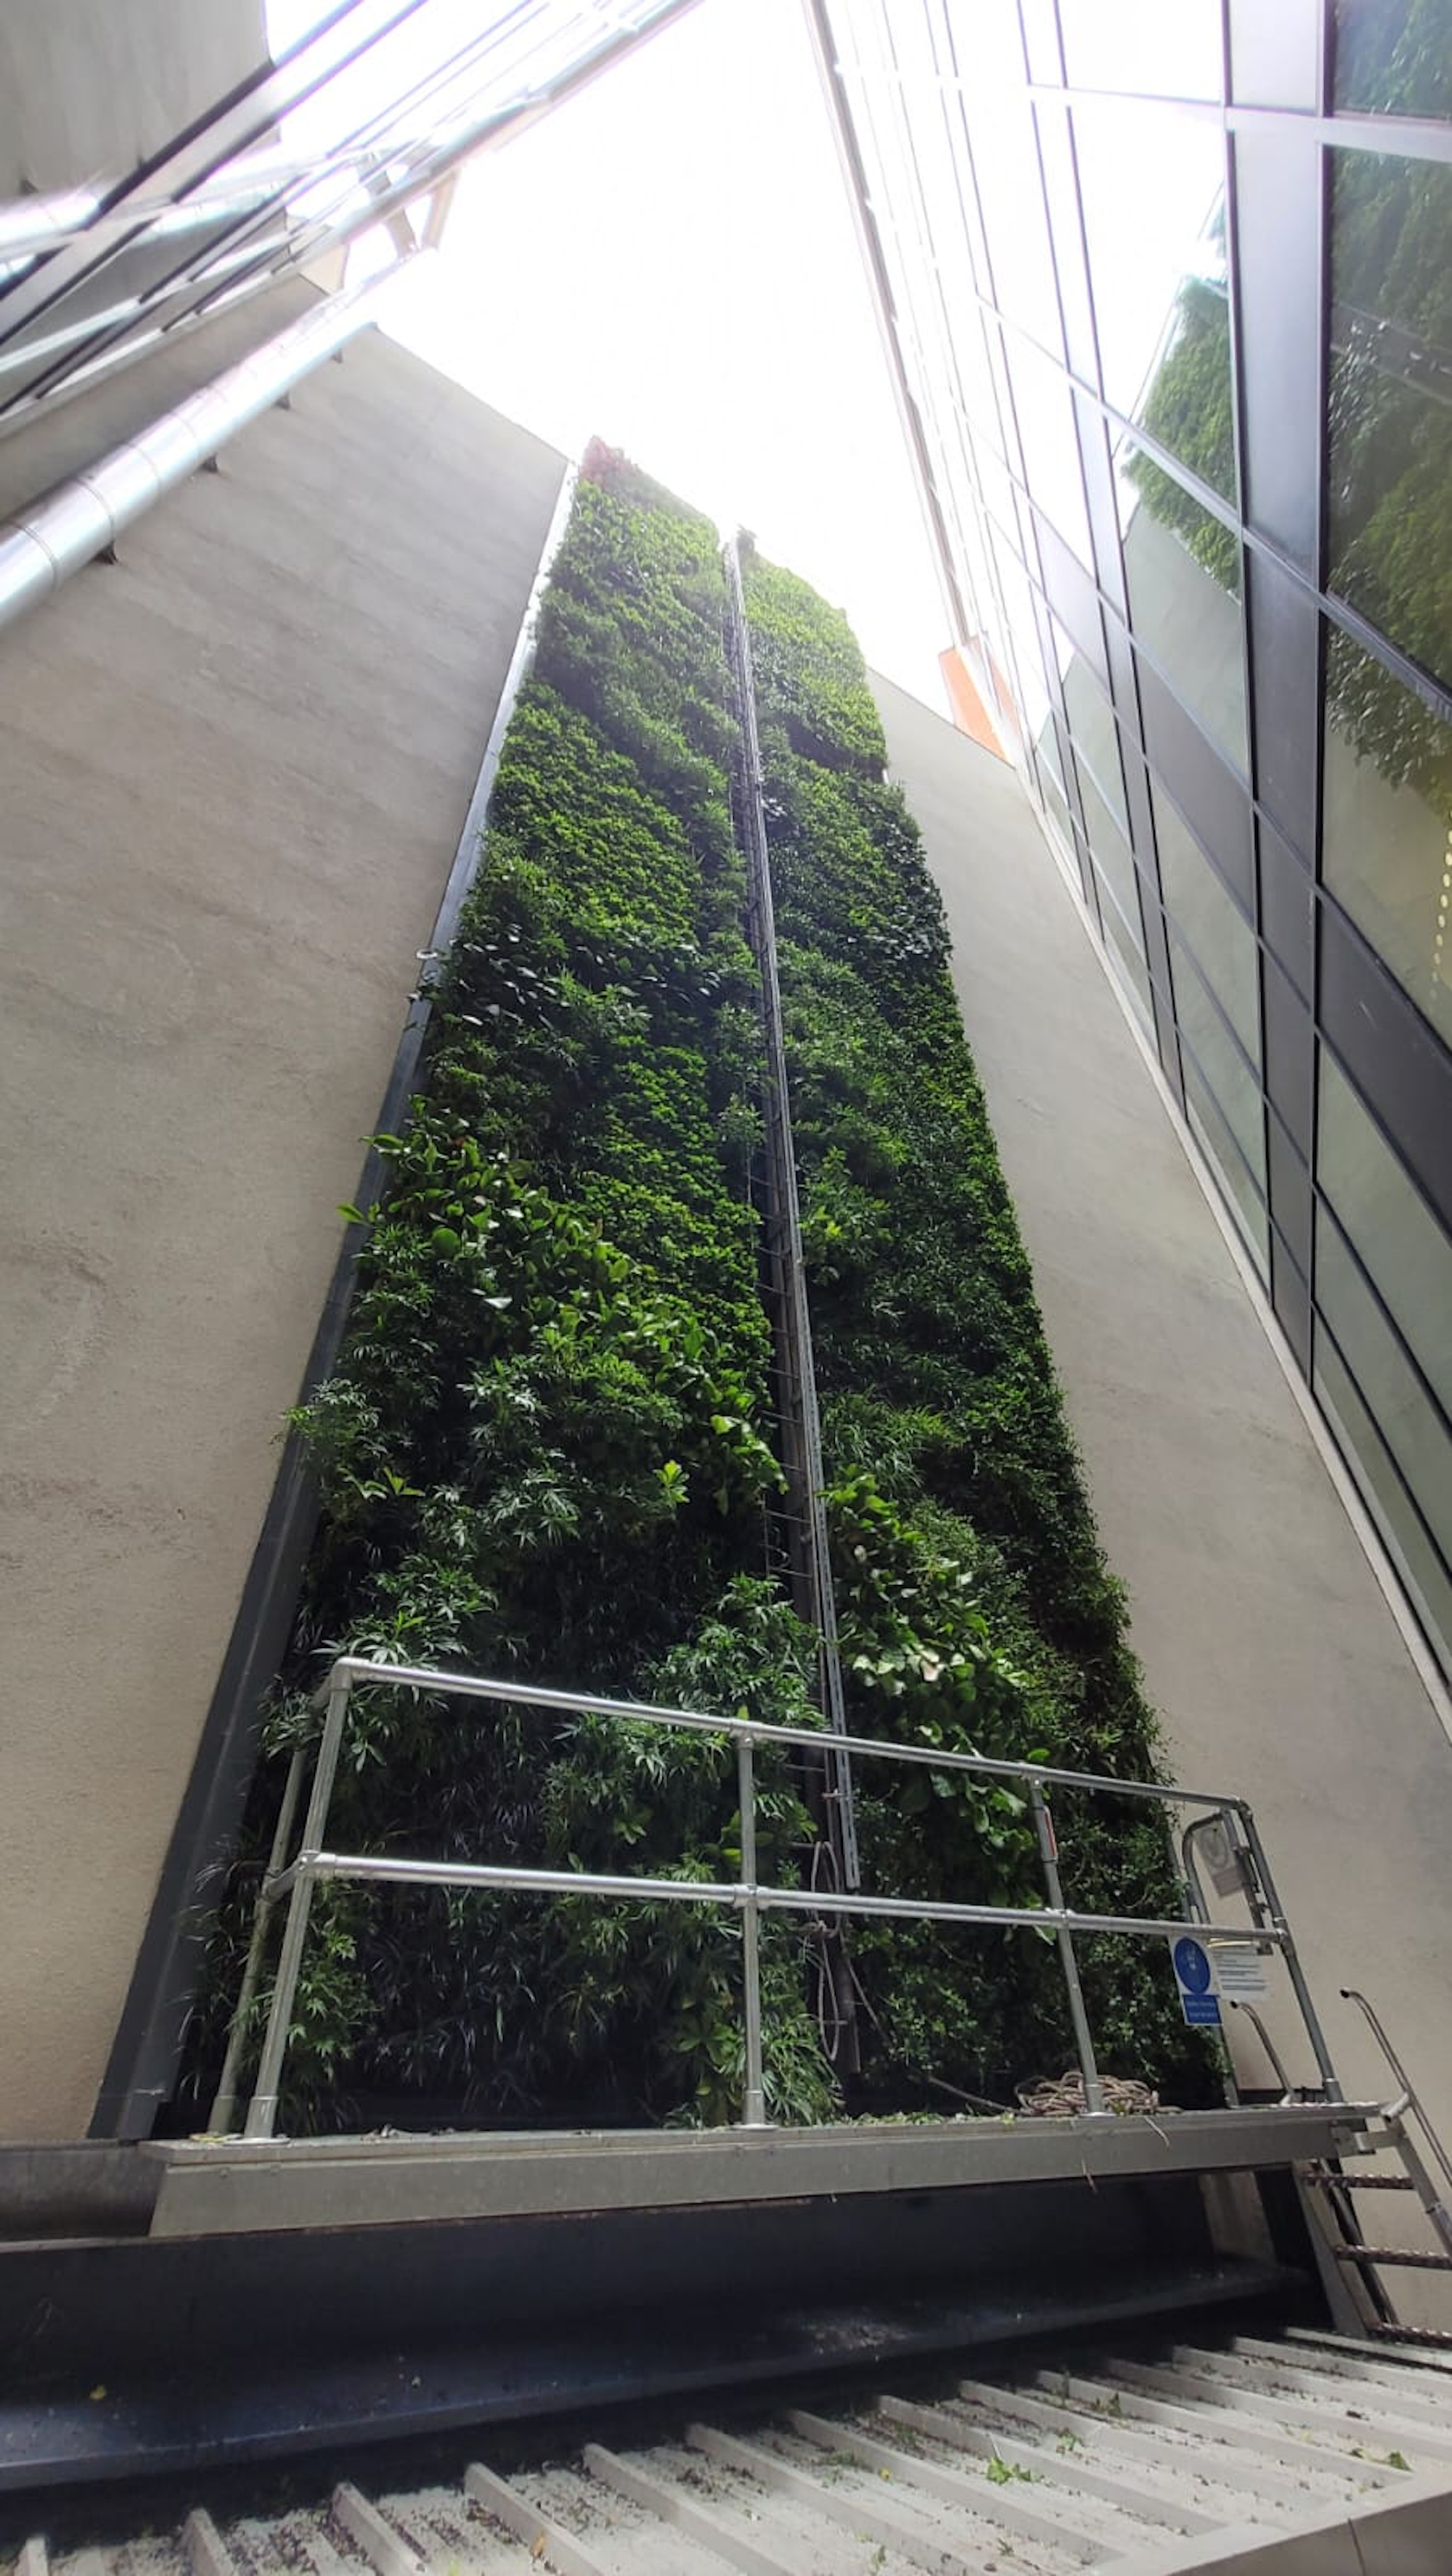 From-the-ground view of the Howick Place Living Wall